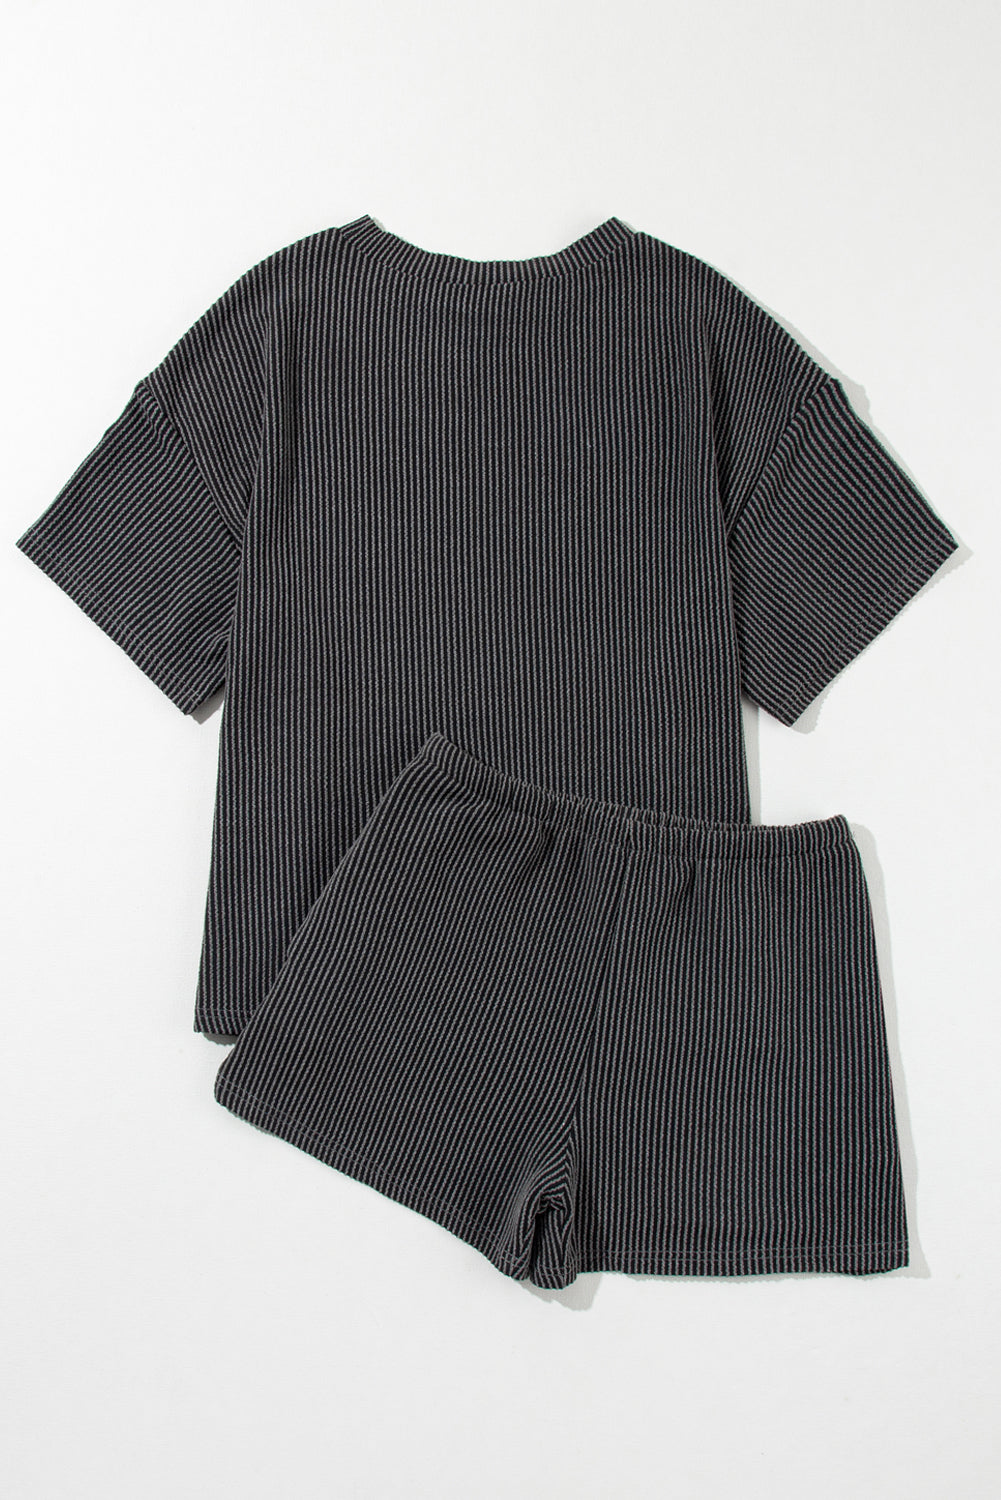 - Ribbed Textured Knit Loose Fit Tee and Shorts Outfit Set - womens short set at TFC&H Co.